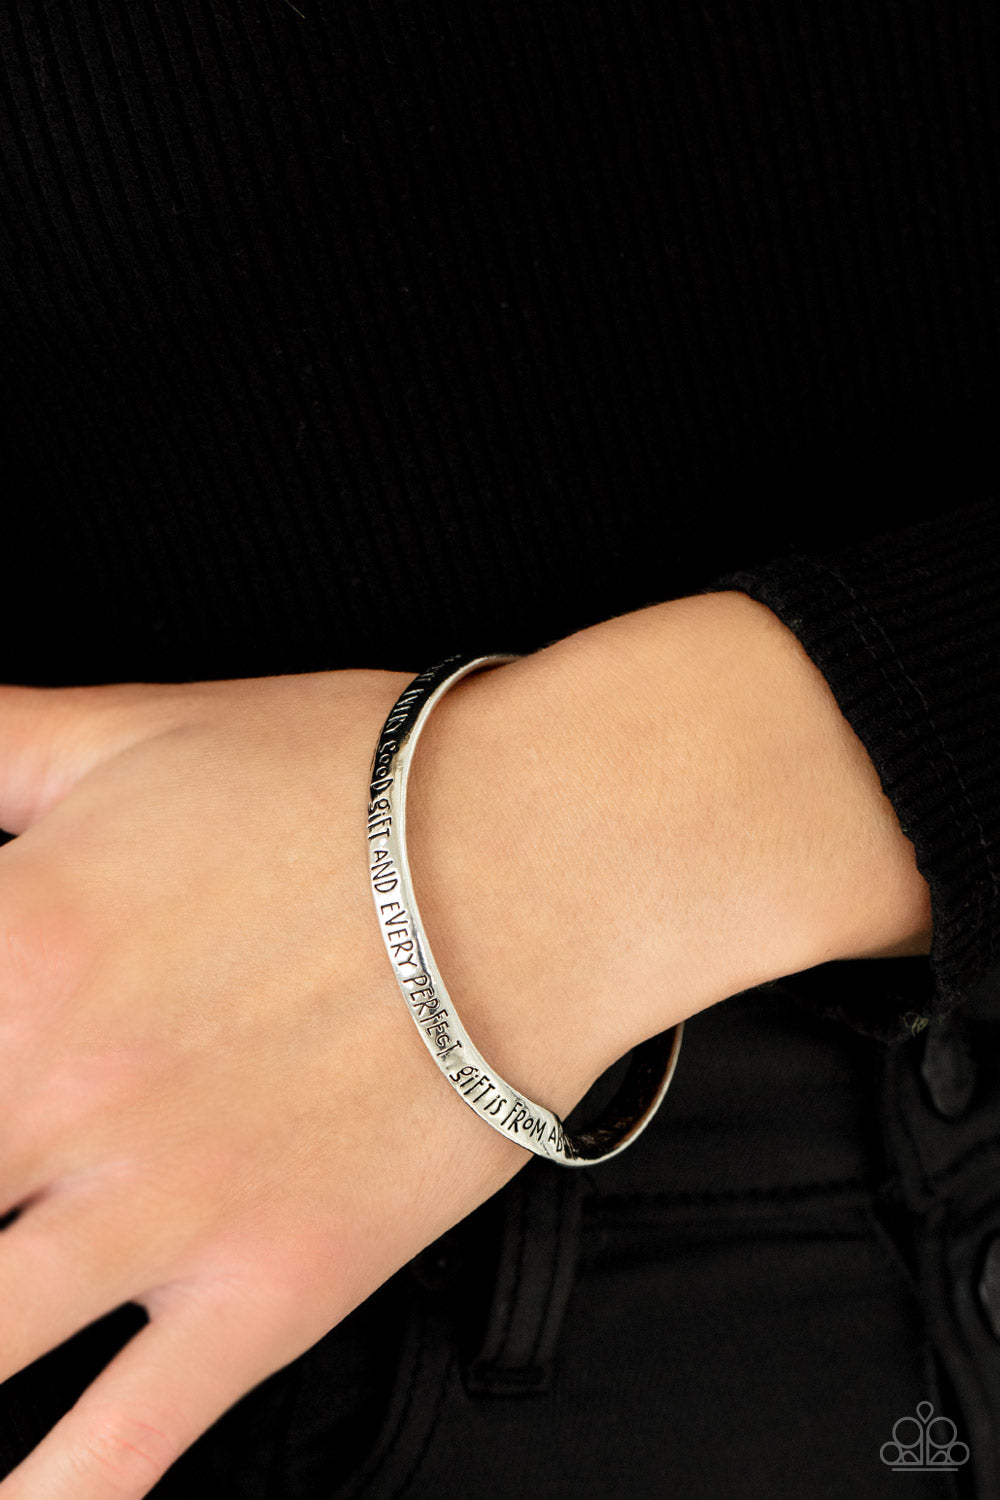 Perfect Present Silver Bangle Bracelet - Paparazzi Accessories  Featuring a subtle twist, a silver bangle is engraved in the biblical passage, "Every good gift and every perfect gift is from above.--James1:17," for an inspirational finish.  Sold as one individual bracelet.